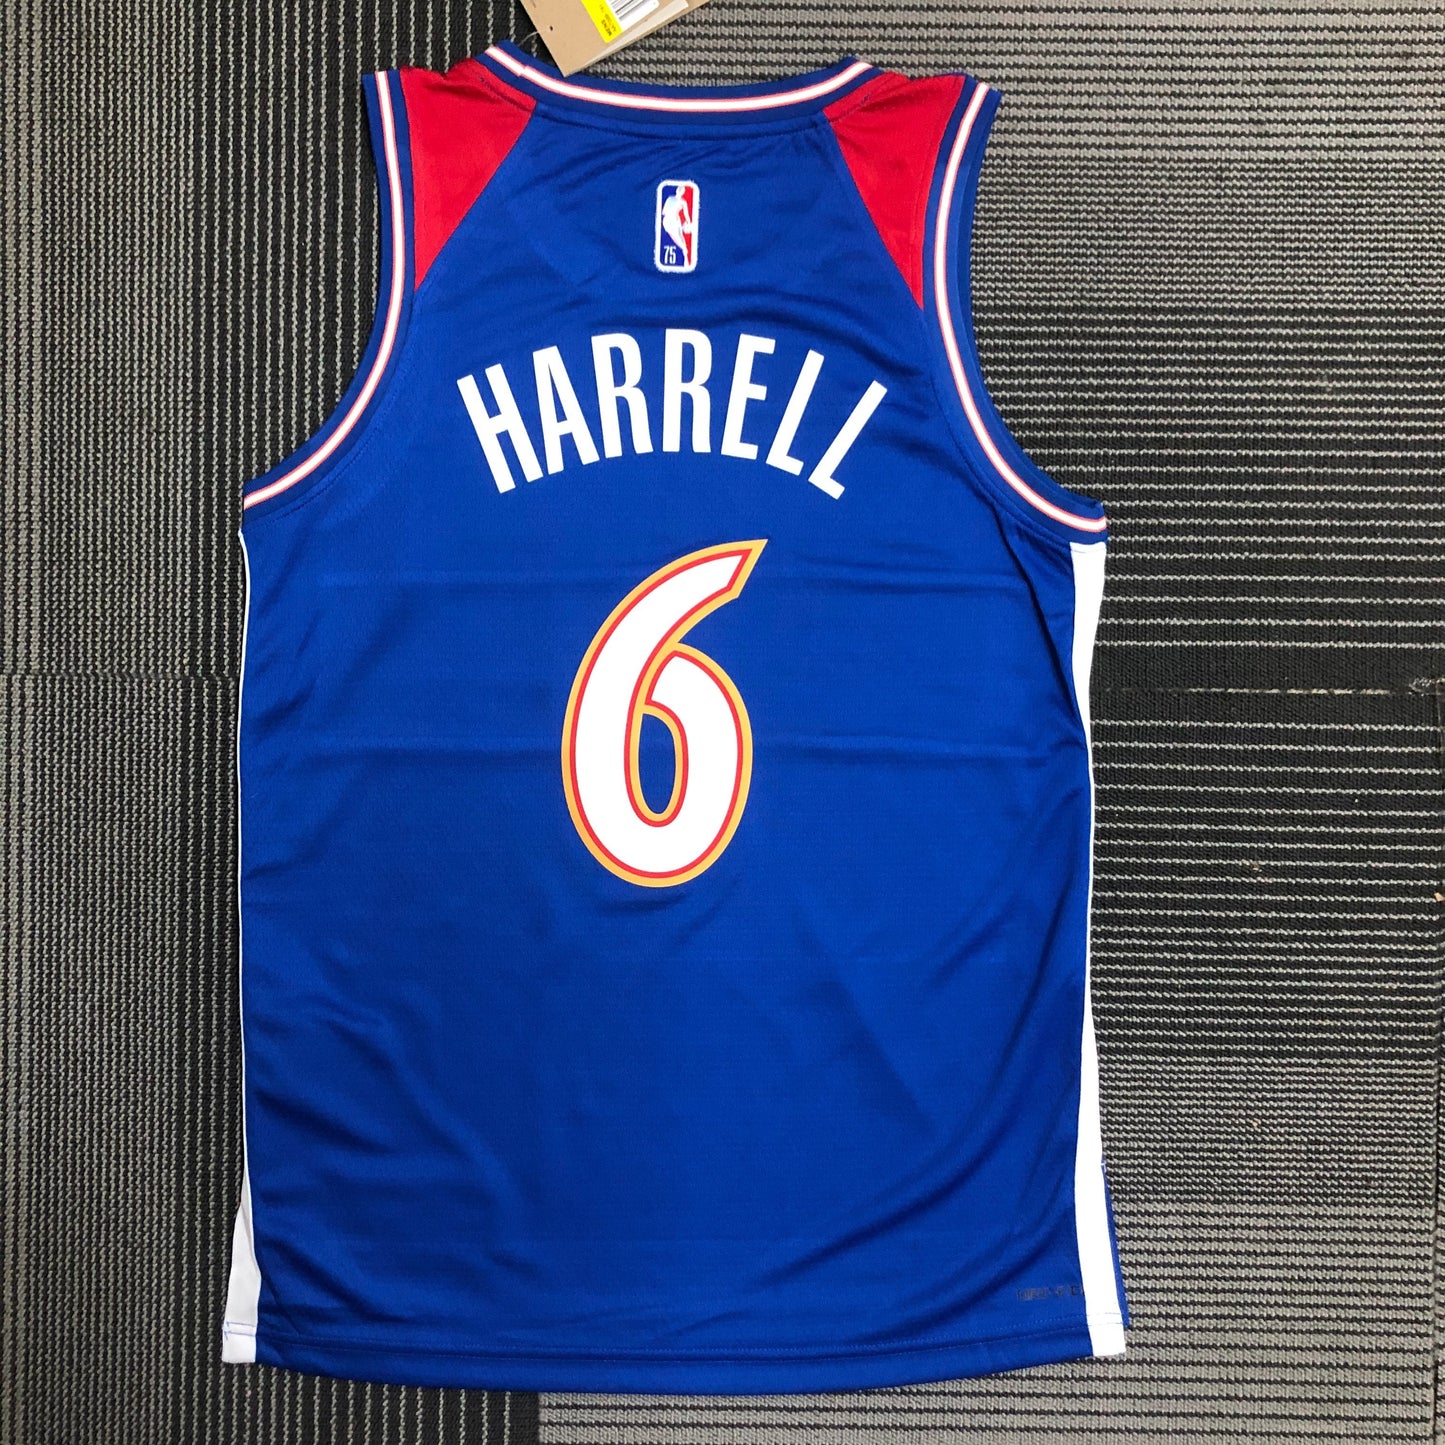 Montrezl Harrell, Washington Wizards, City Edition Jersey, Basketball, Vibrant Design, City Pride, High-Quality Craftsmanship, Wizards Fan Must-Have, Authentic Design, Community Tribute